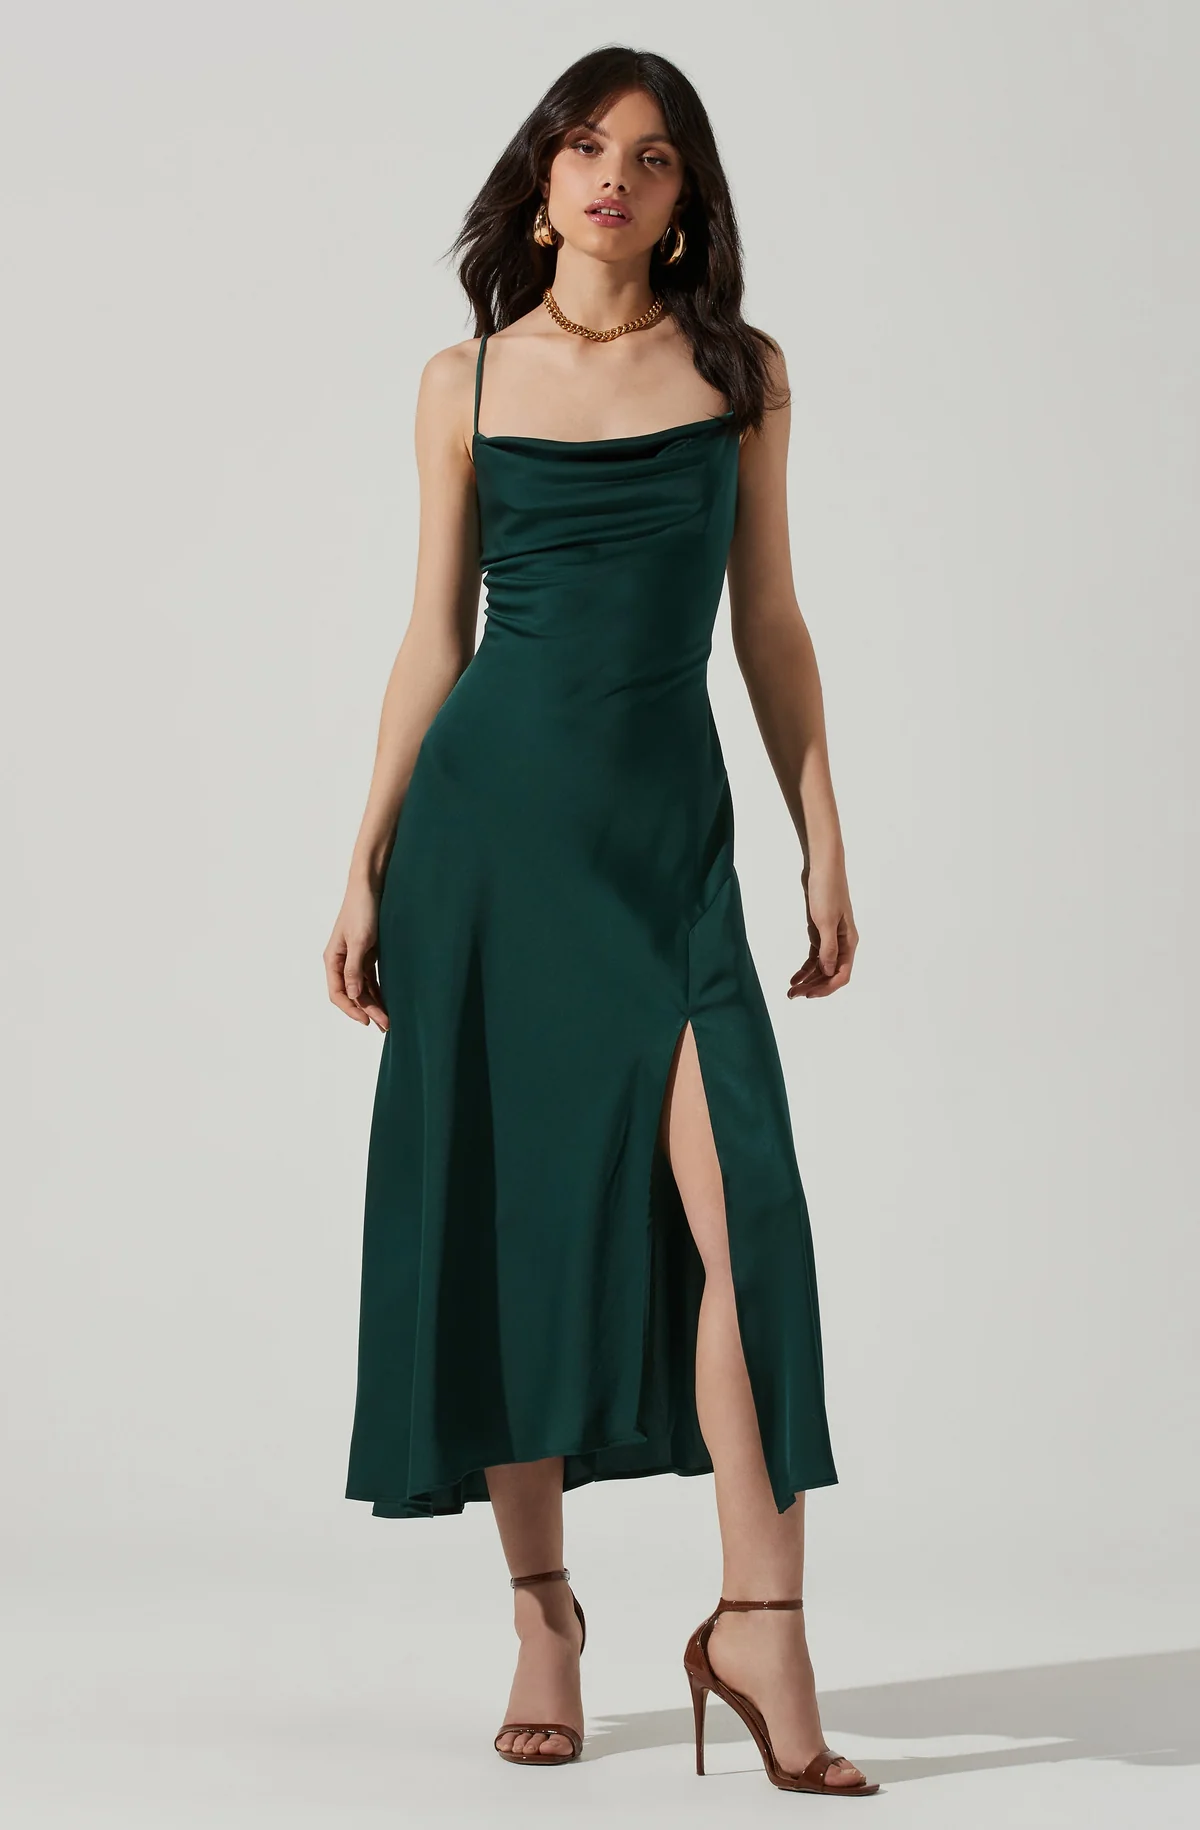 Green Dress: Adding Vibrancy and Style to Your Wardrobe